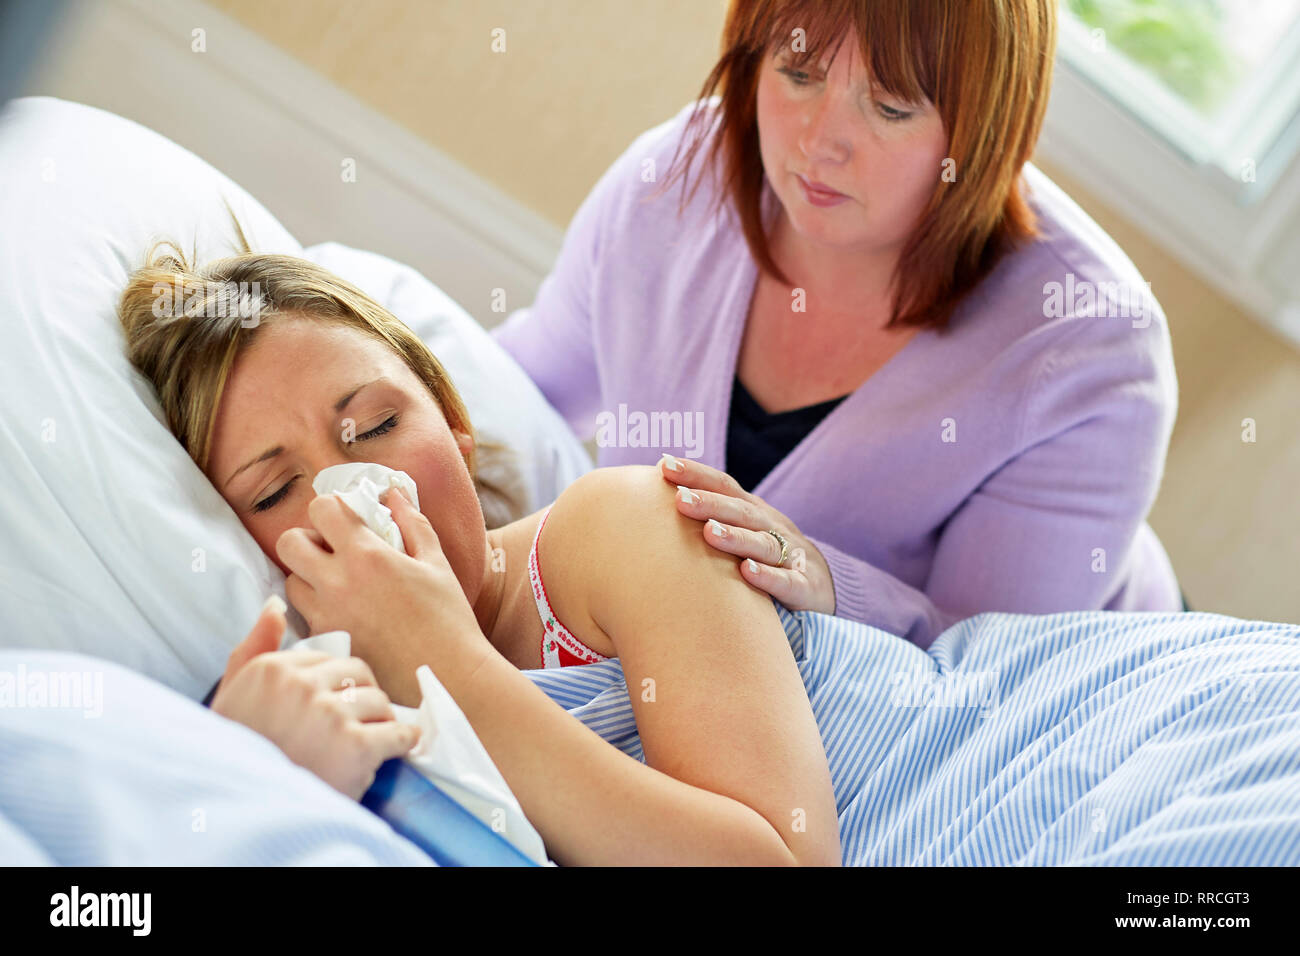 Teenage girl laid in bed with the flu Stock Photo